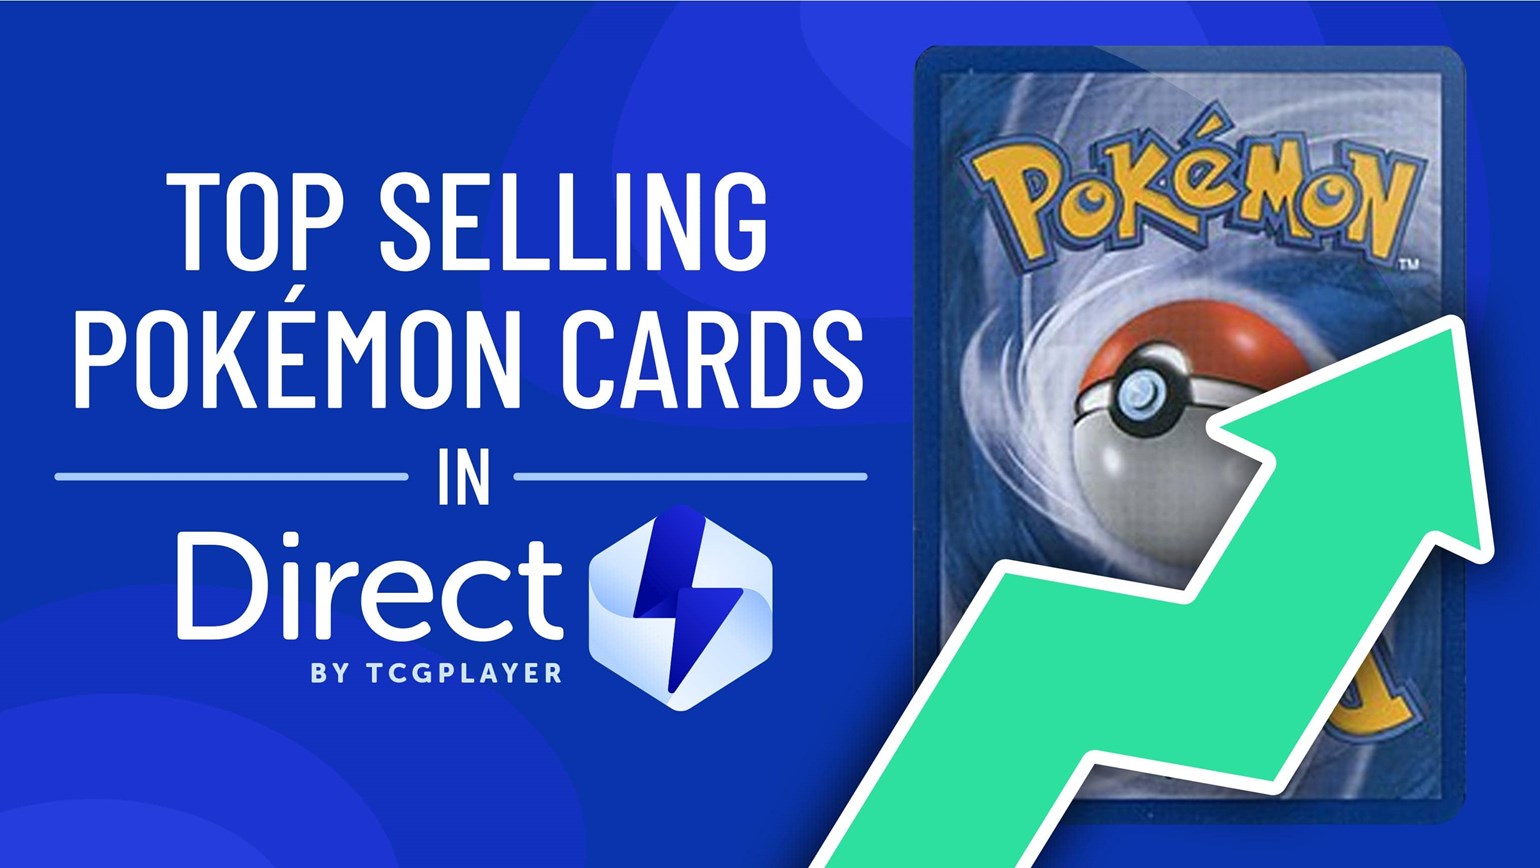 December Top Selling Pokémon Cards in Direct by TCGplayer